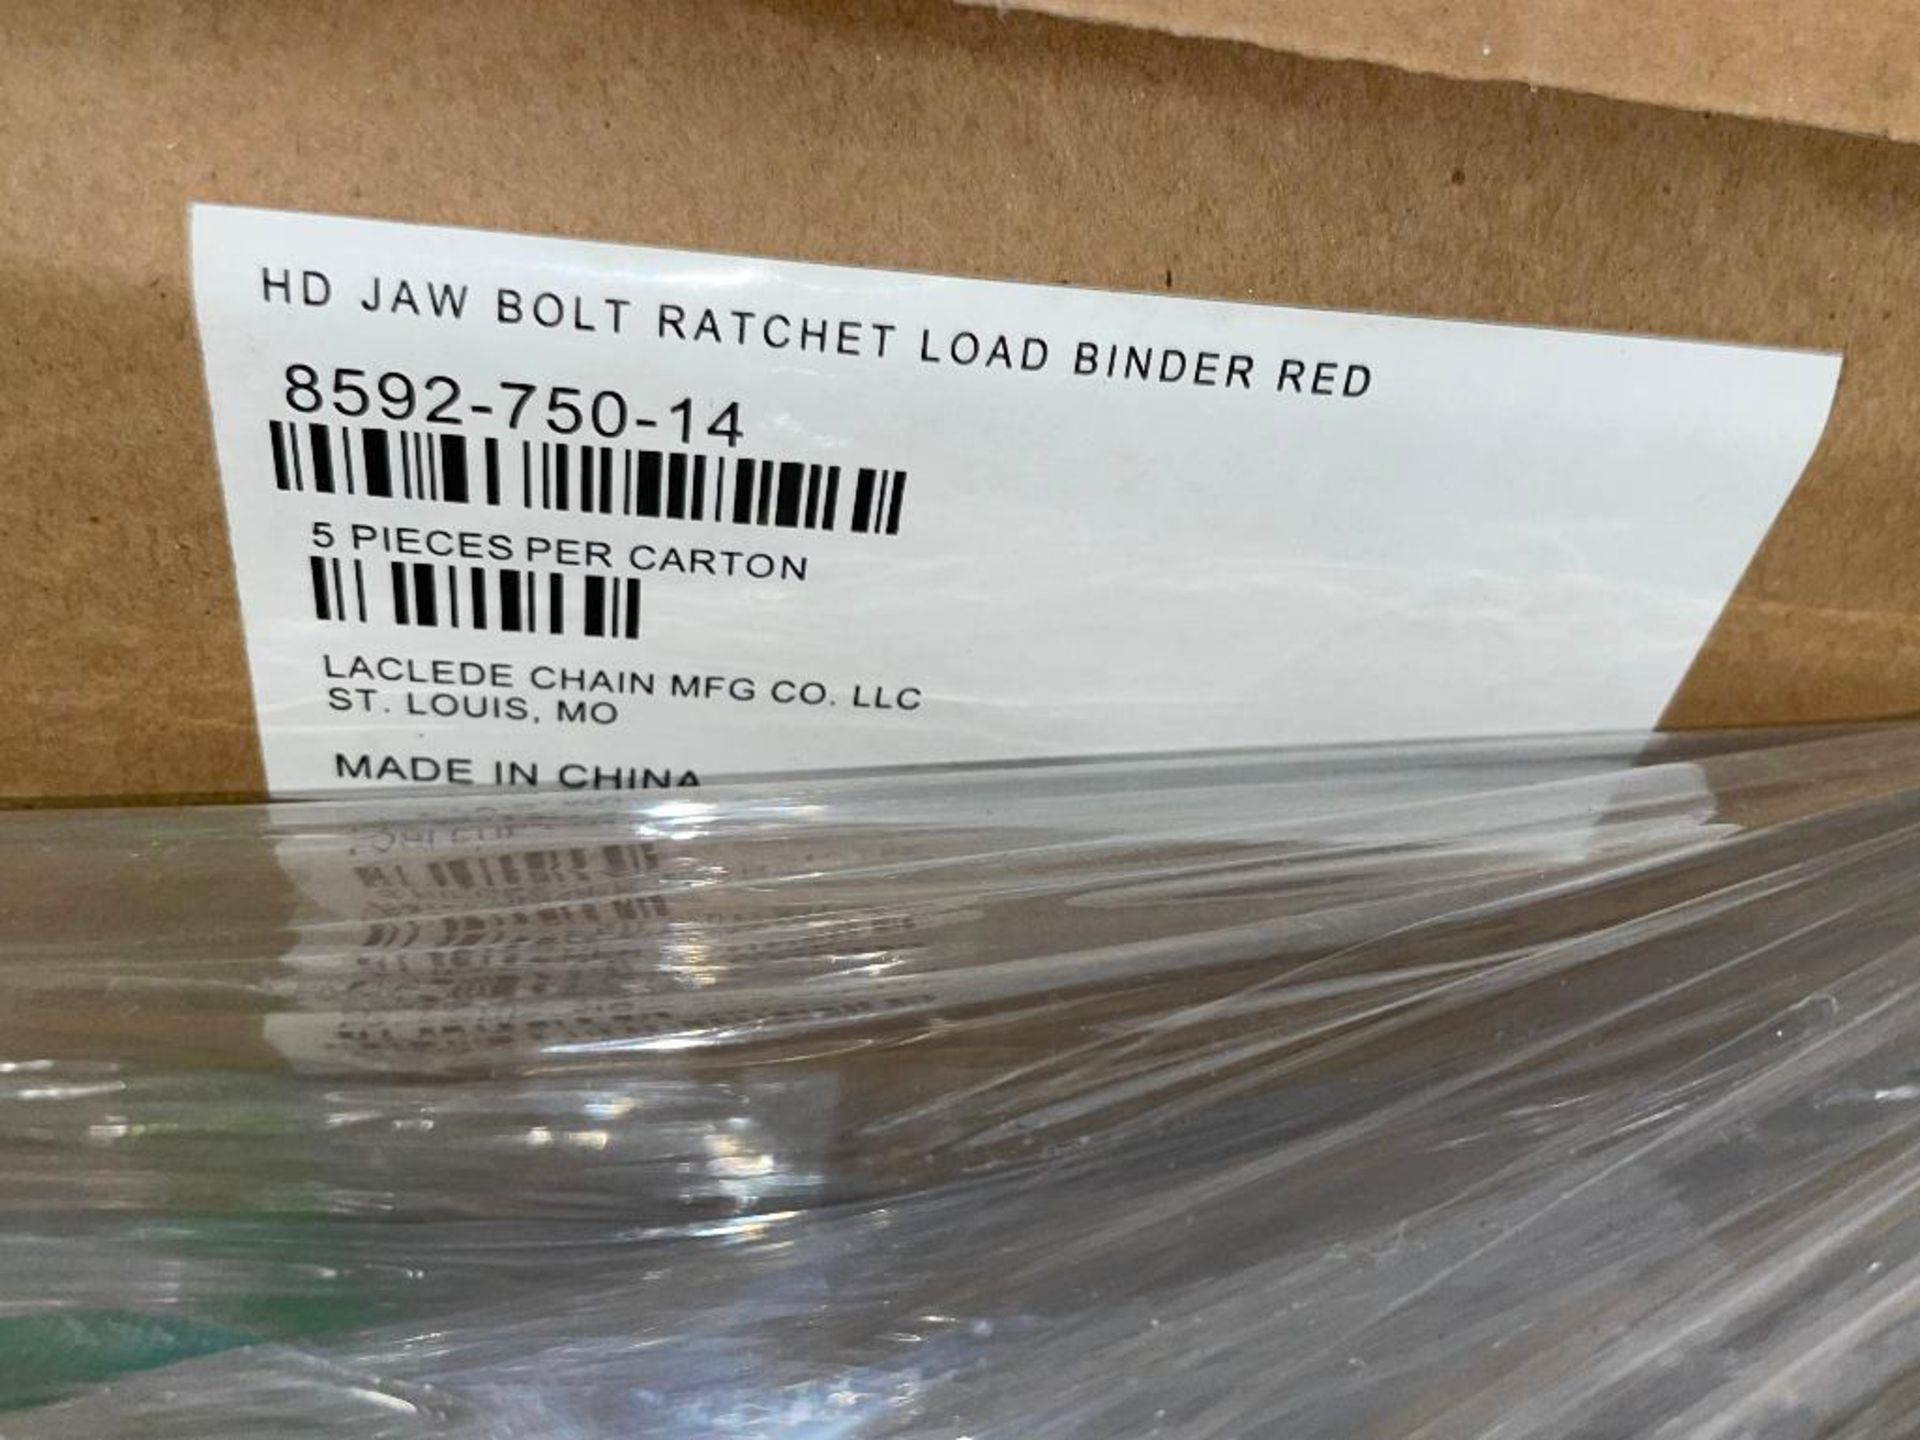 DESCRIPTION: (2) CASES OF HD JAW BOLT RATCHET LOAD BINDERS - RED. 5 PER CASE, 10 IN LOT TOTAL. BRAND - Image 6 of 6